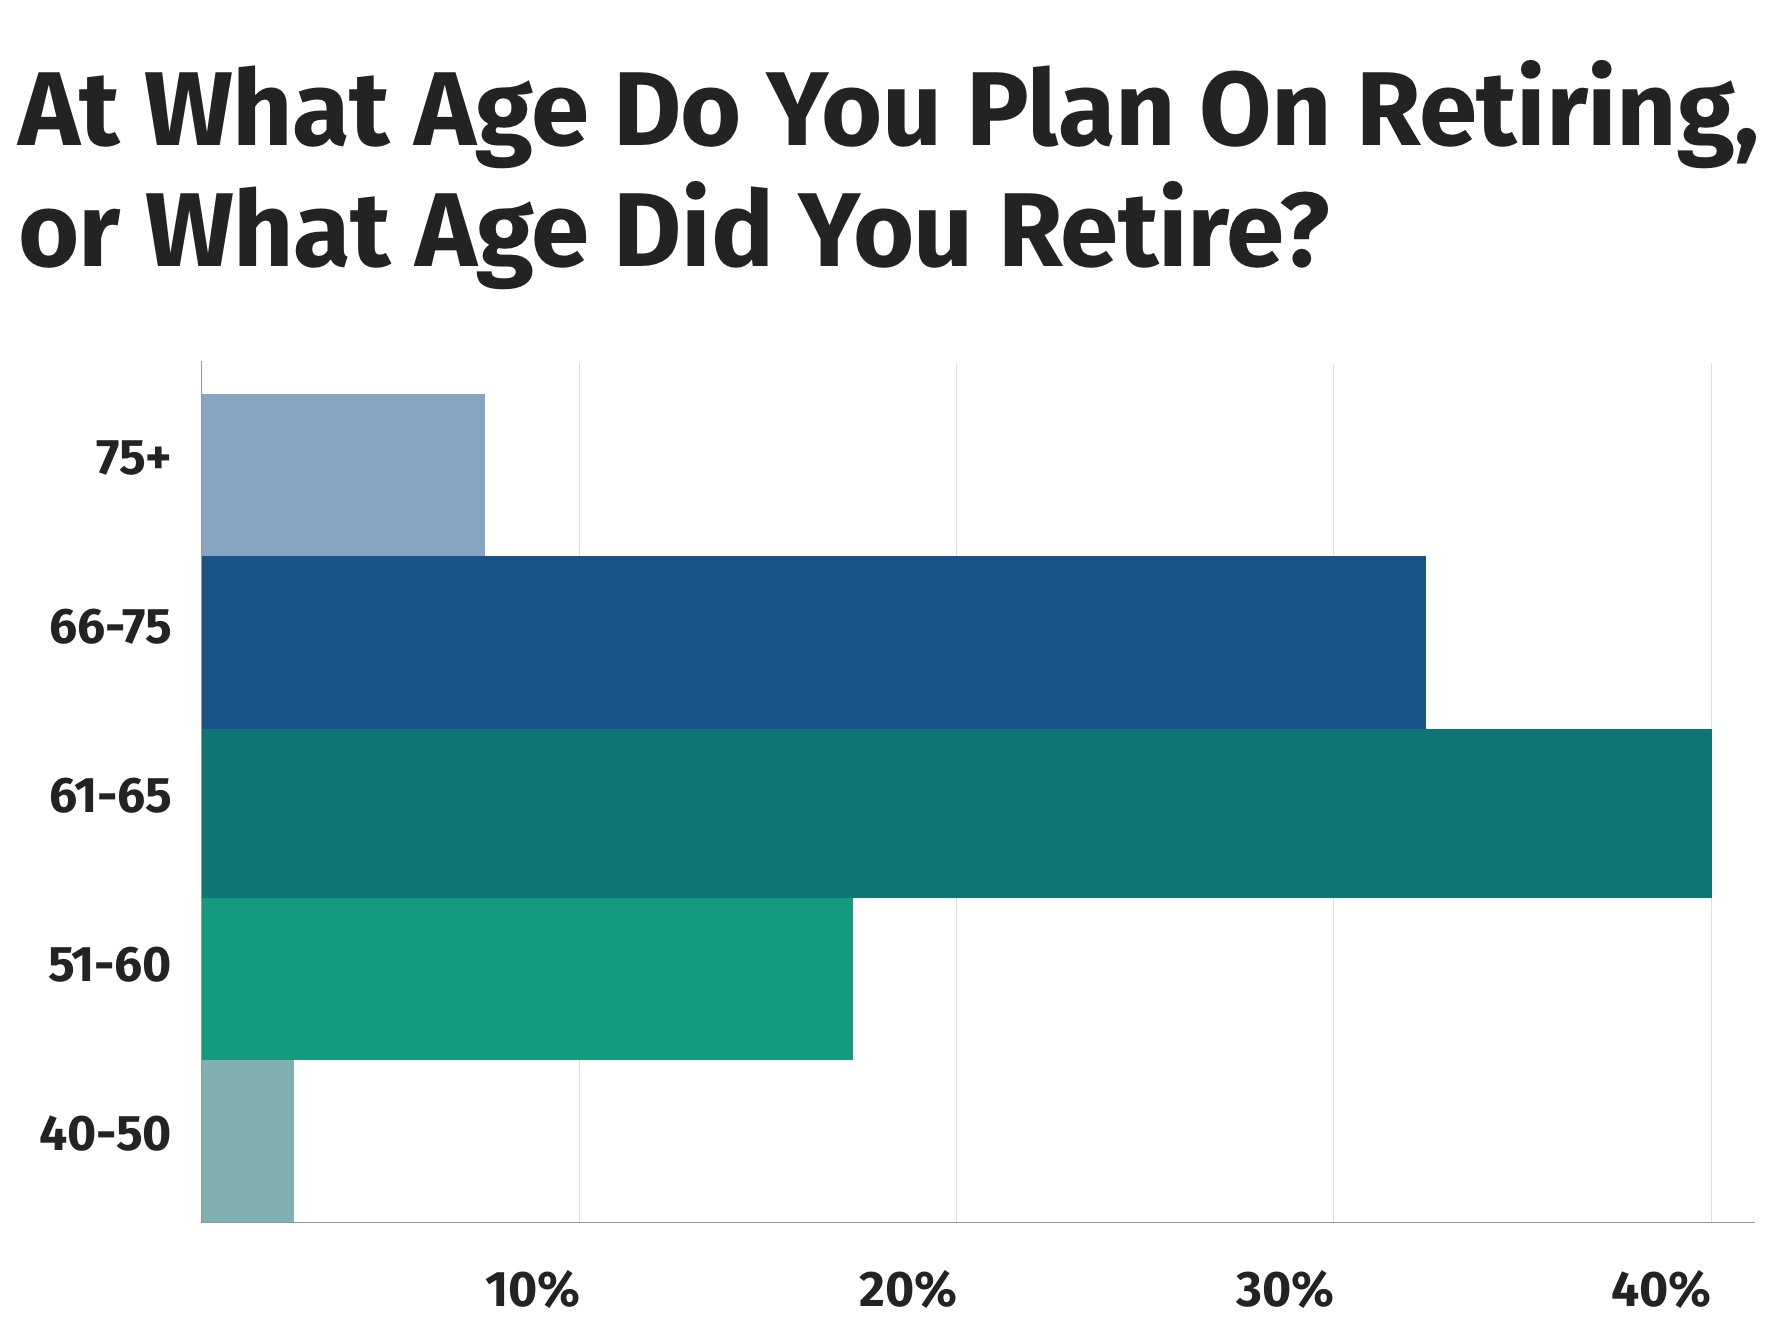 At what age do you plan on retiring, or what age did you retire?